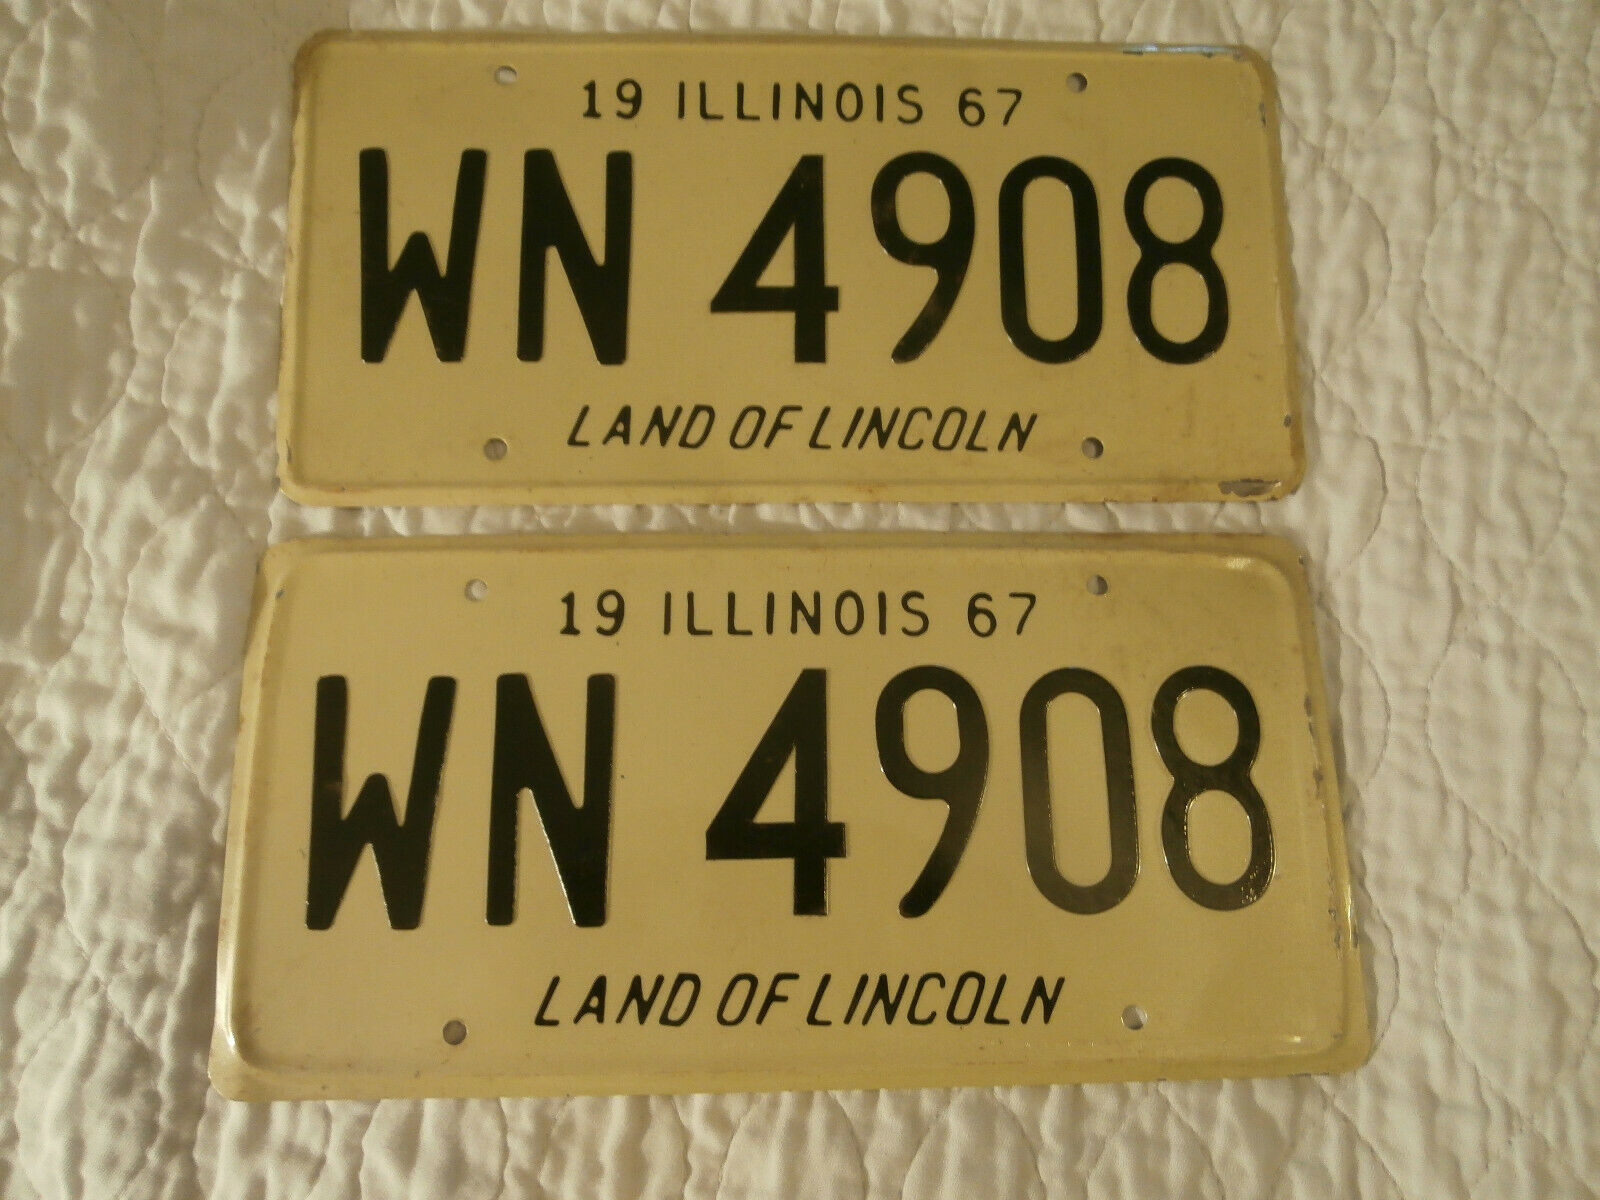 Illinois 1967 Vintage License Plate Pair Classic Muscle Car Tags Man Cave Wn4908